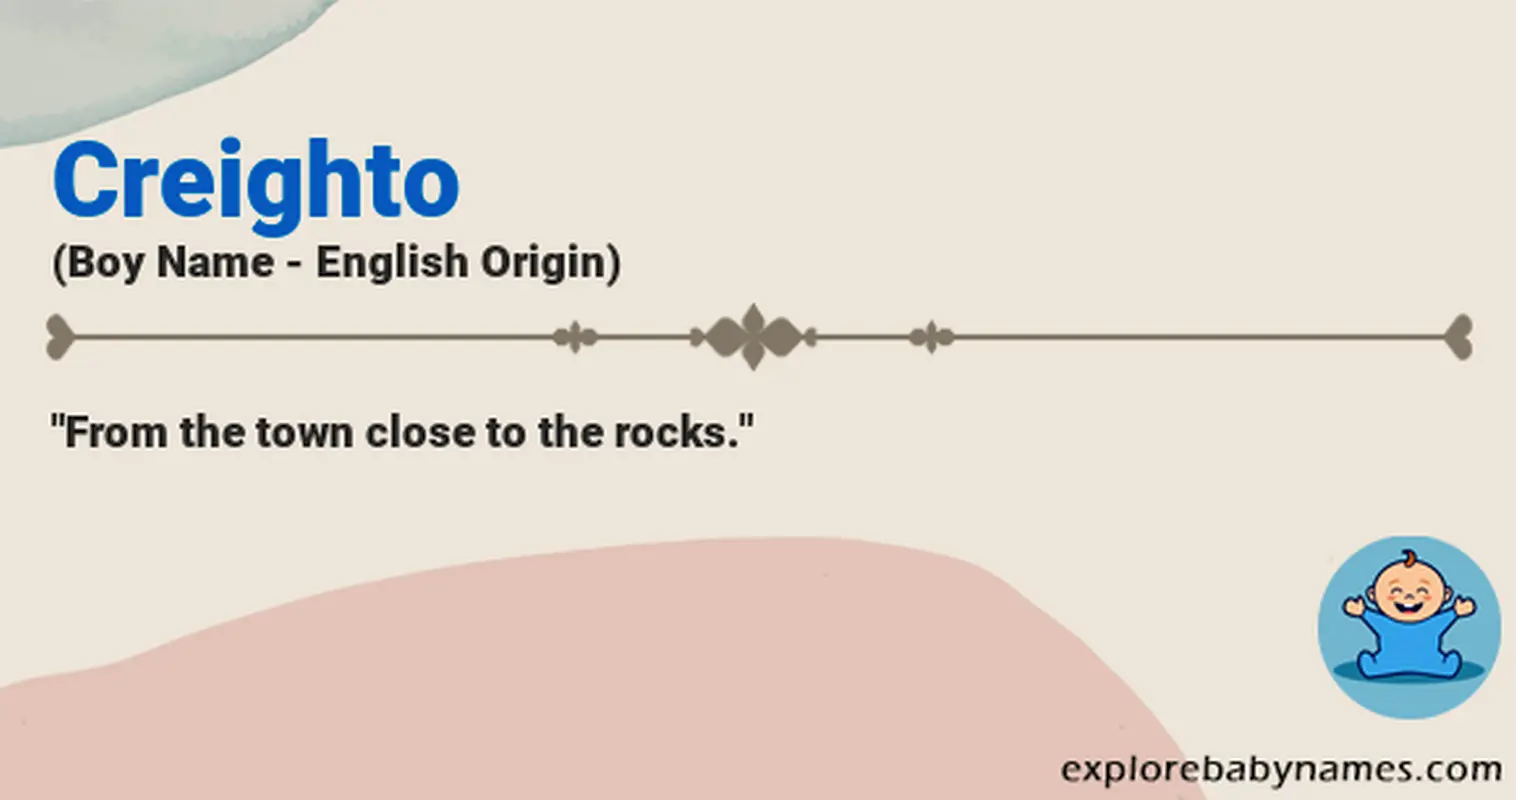 Meaning of Creighto